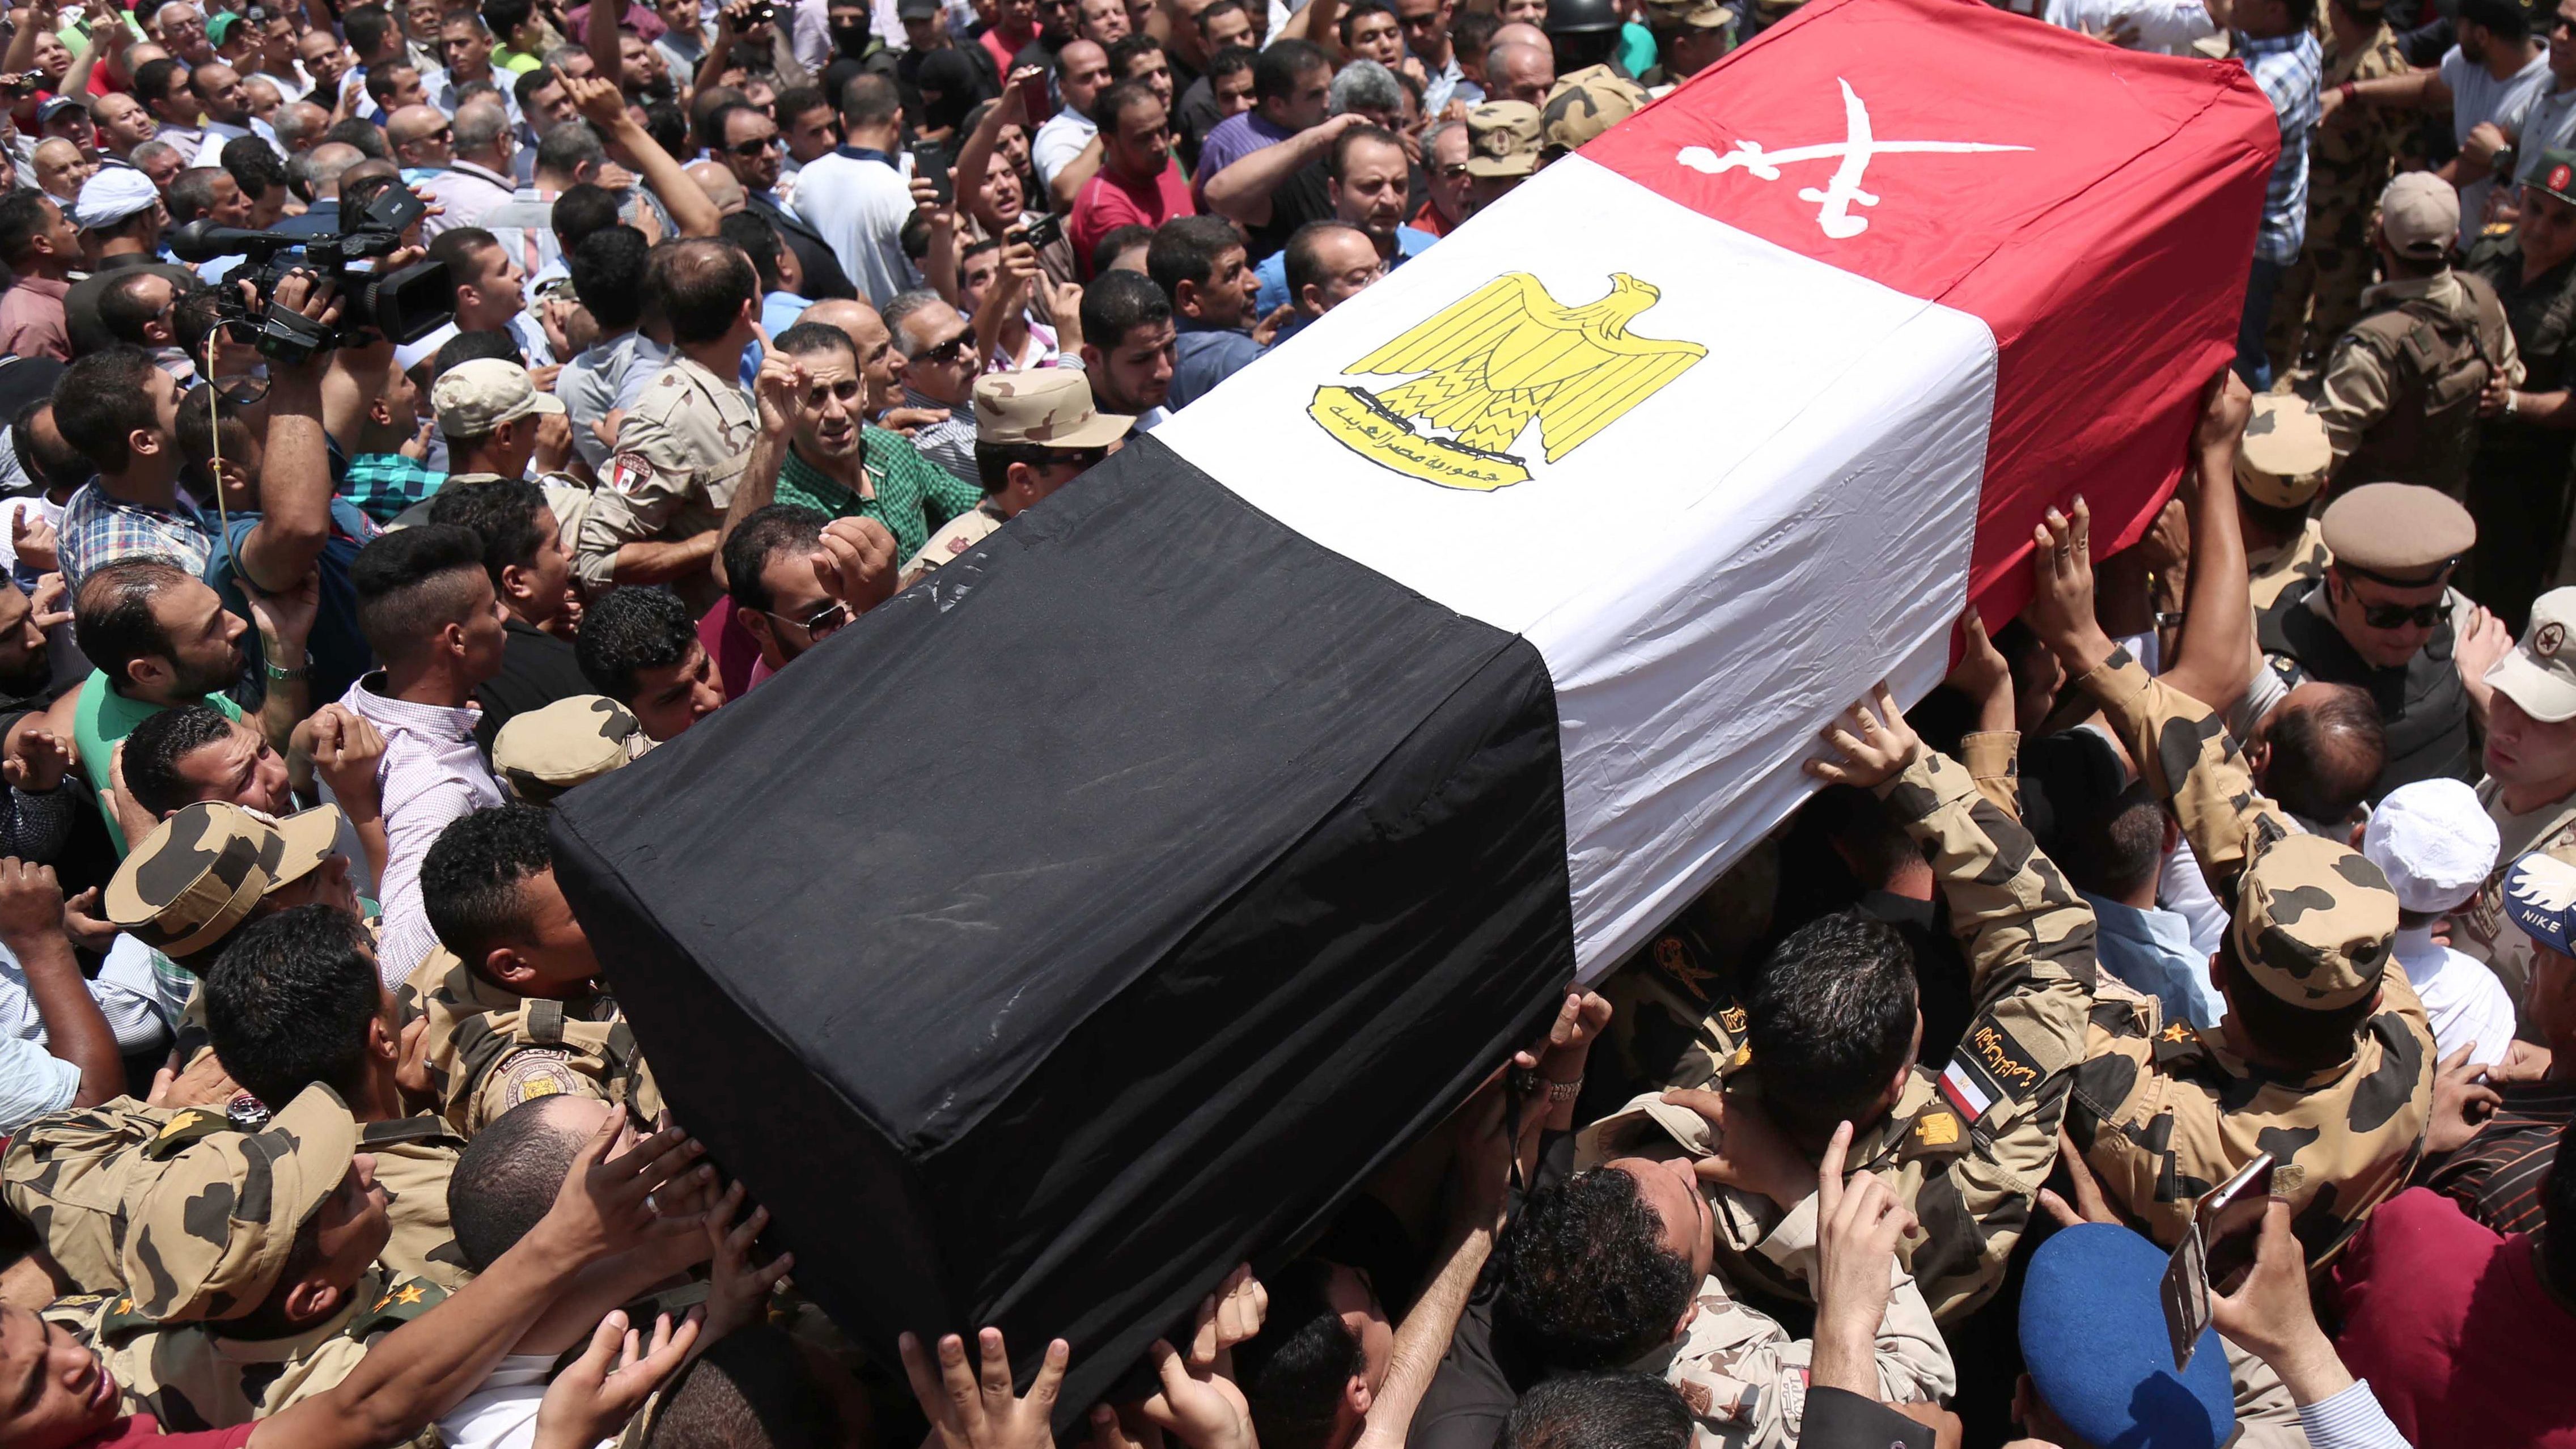 Cairo Sees Report on Sinai as ‘Politicized and Misleading’